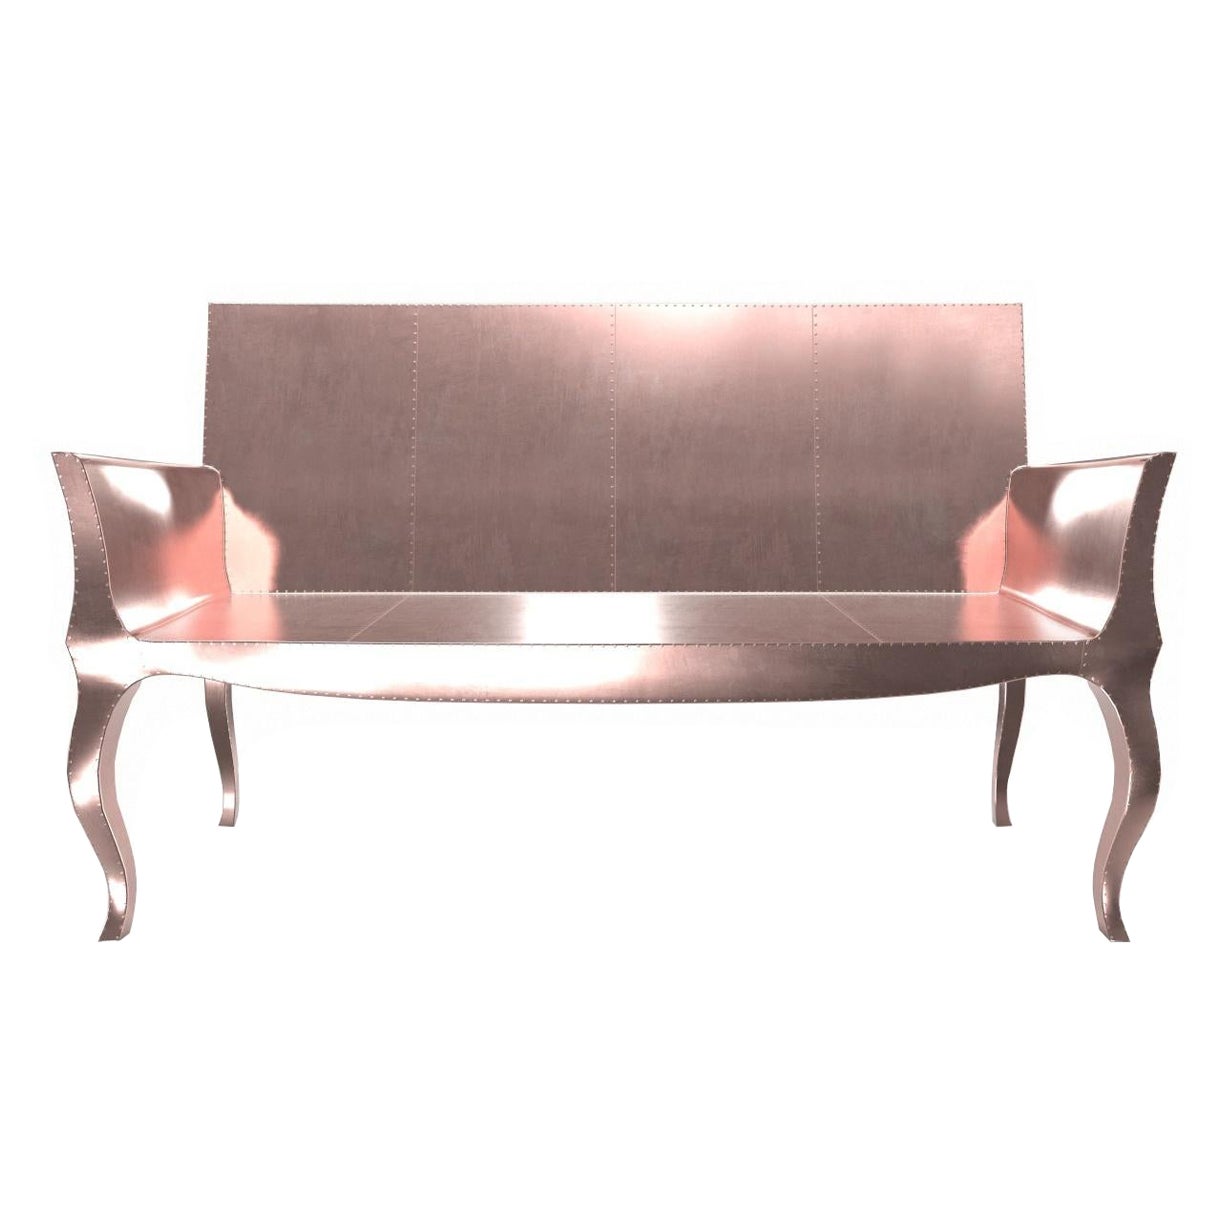 Louise Settee Art Deco Settees in Smooth Copper by Paul Mathieu for S Odegard